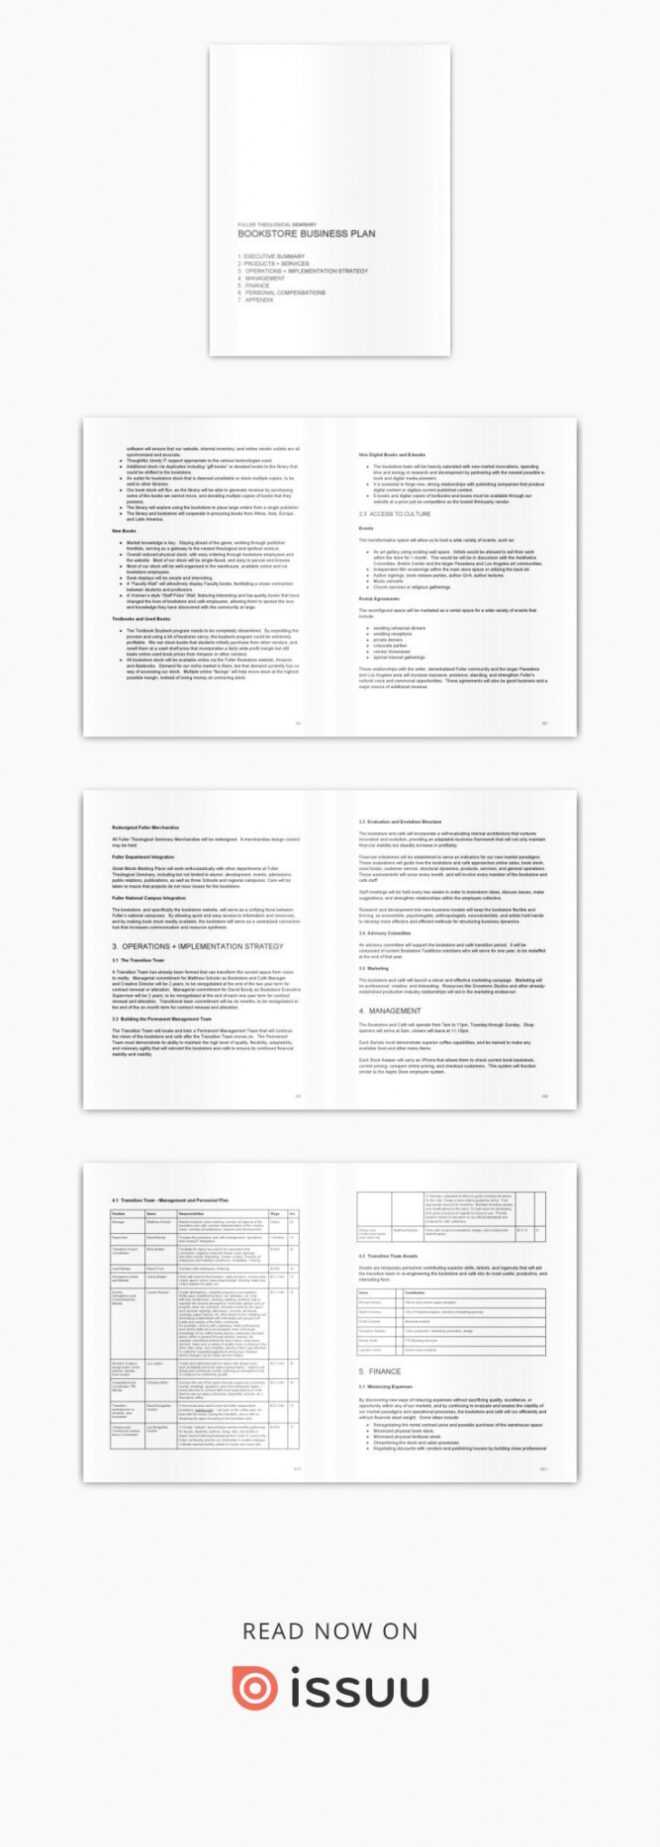 Business N Book Shop Sample Bookstore Template Example Plan intended for Bookstore Business Plan Template